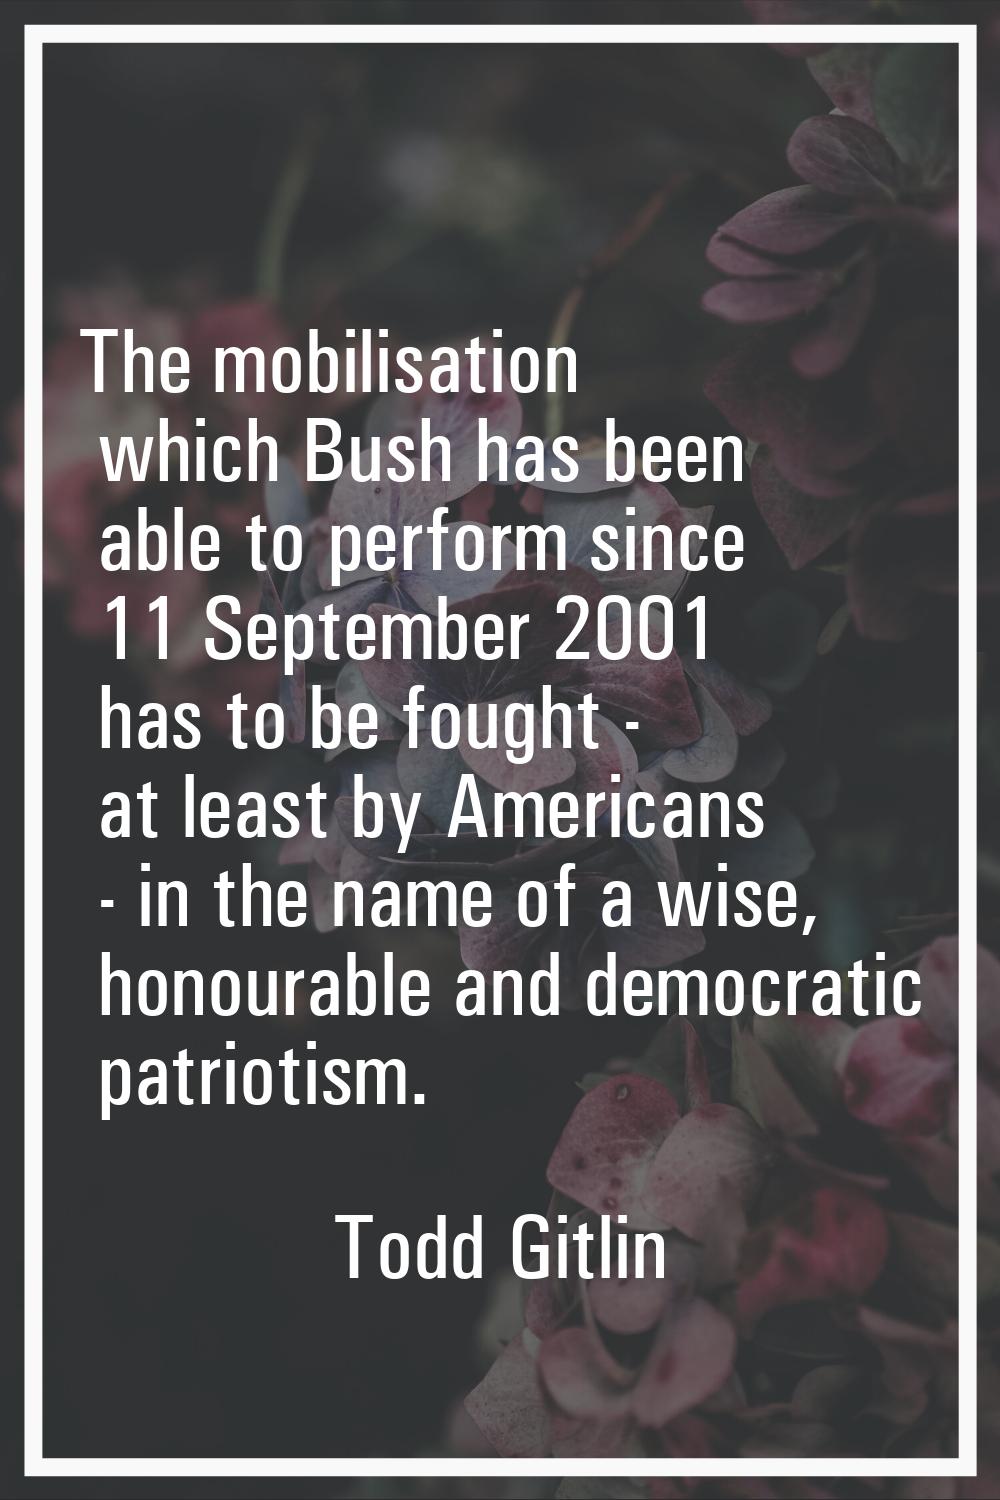 The mobilisation which Bush has been able to perform since 11 September 2001 has to be fought - at 